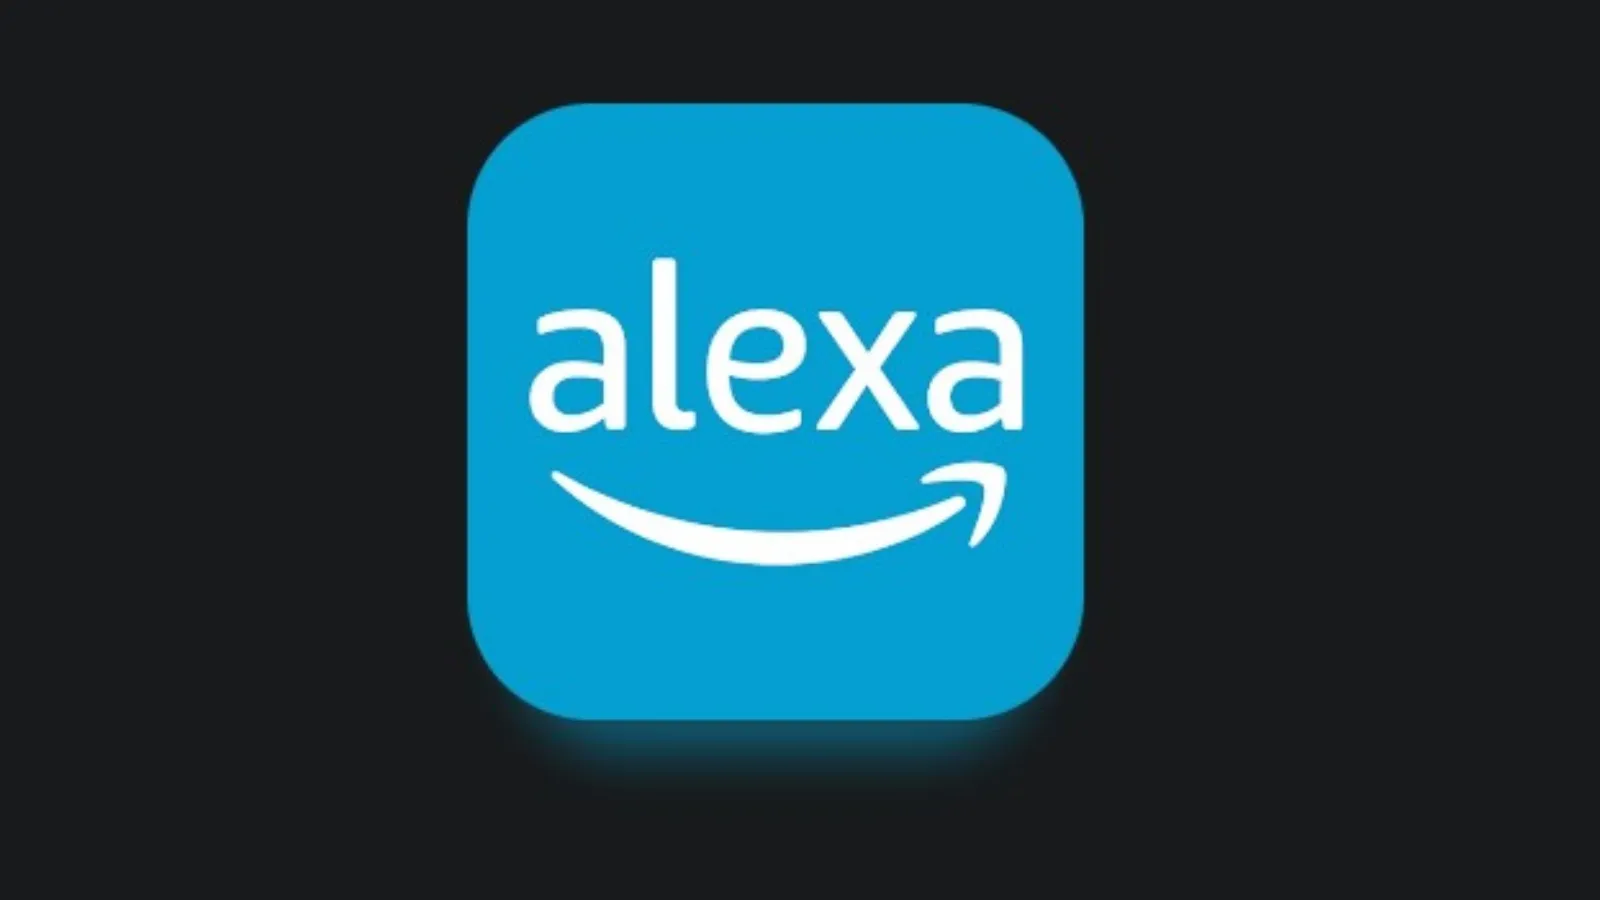 Amazon Alexa app update brings redesigned homepage and smart home controls - The Indian Express